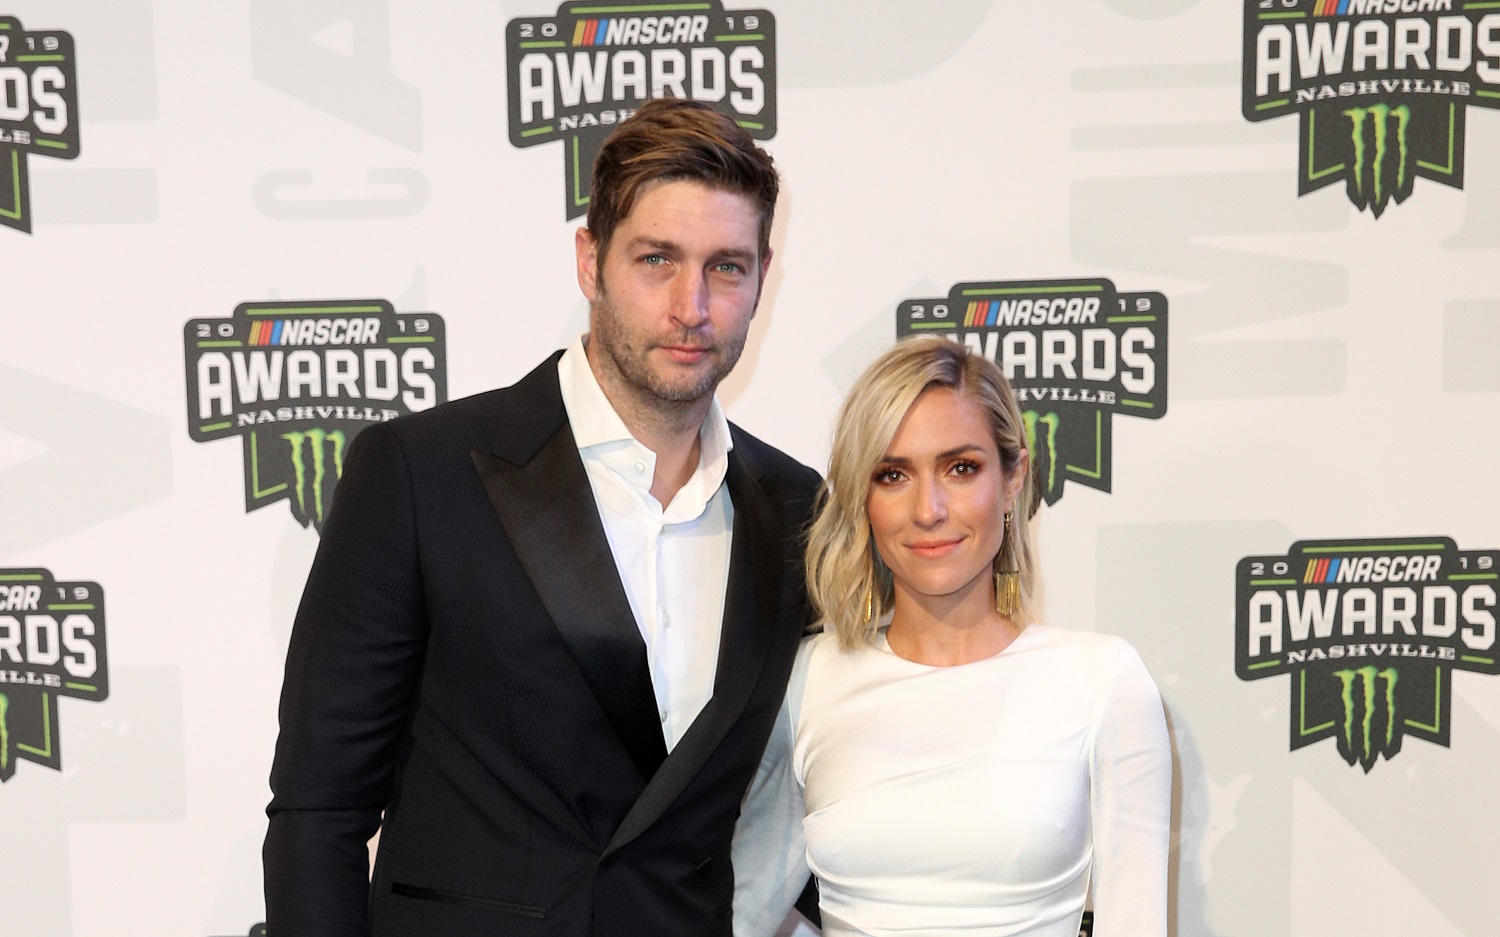 Jay Cutler and Kristin Cavallari attend the NASCAR Cup Series Awards on Dec. 5, 2019, in Nashville, Tennessee.